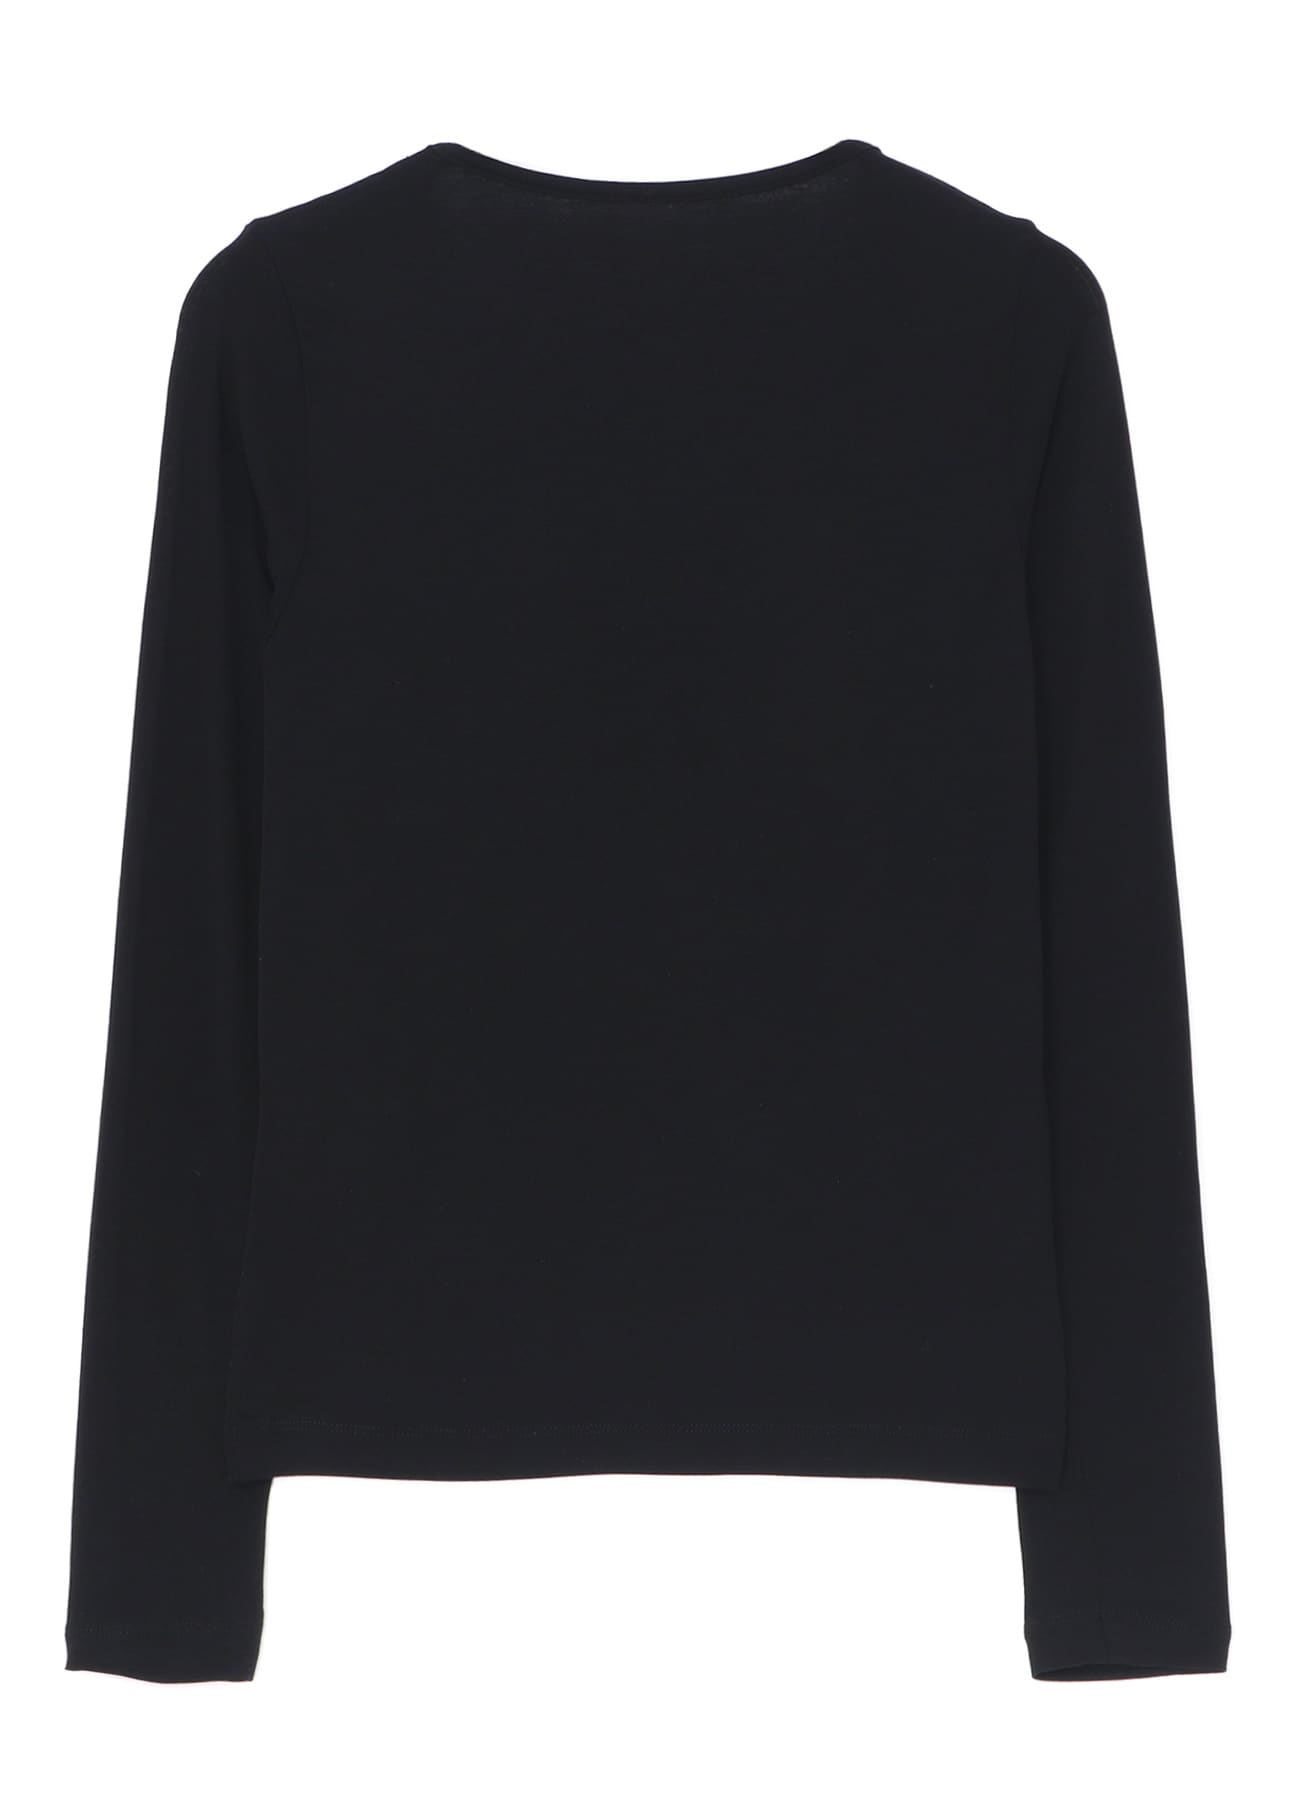 RAYON JERSEY ROUND NECK LONG SLEEVE T